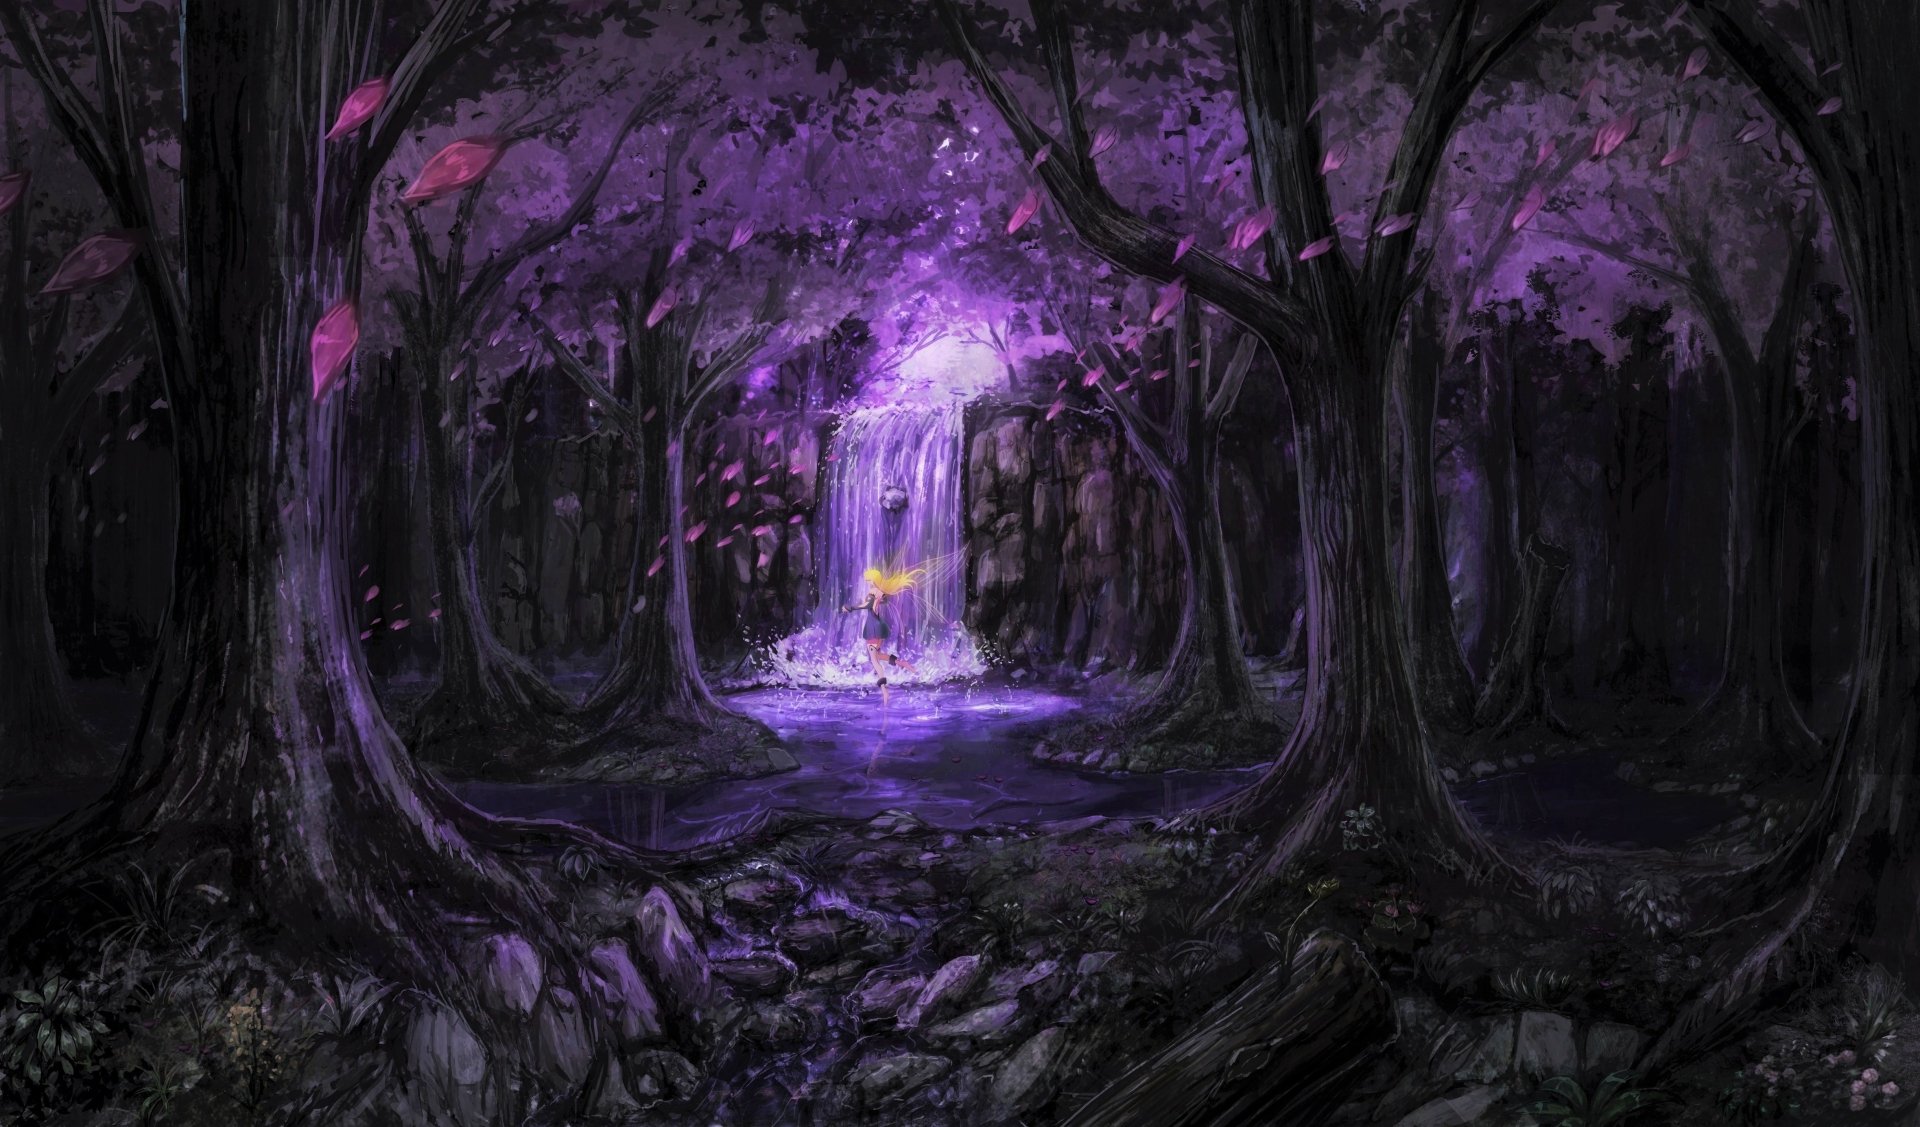 Fairy in Purple Fantasy Forest by そ よ 風